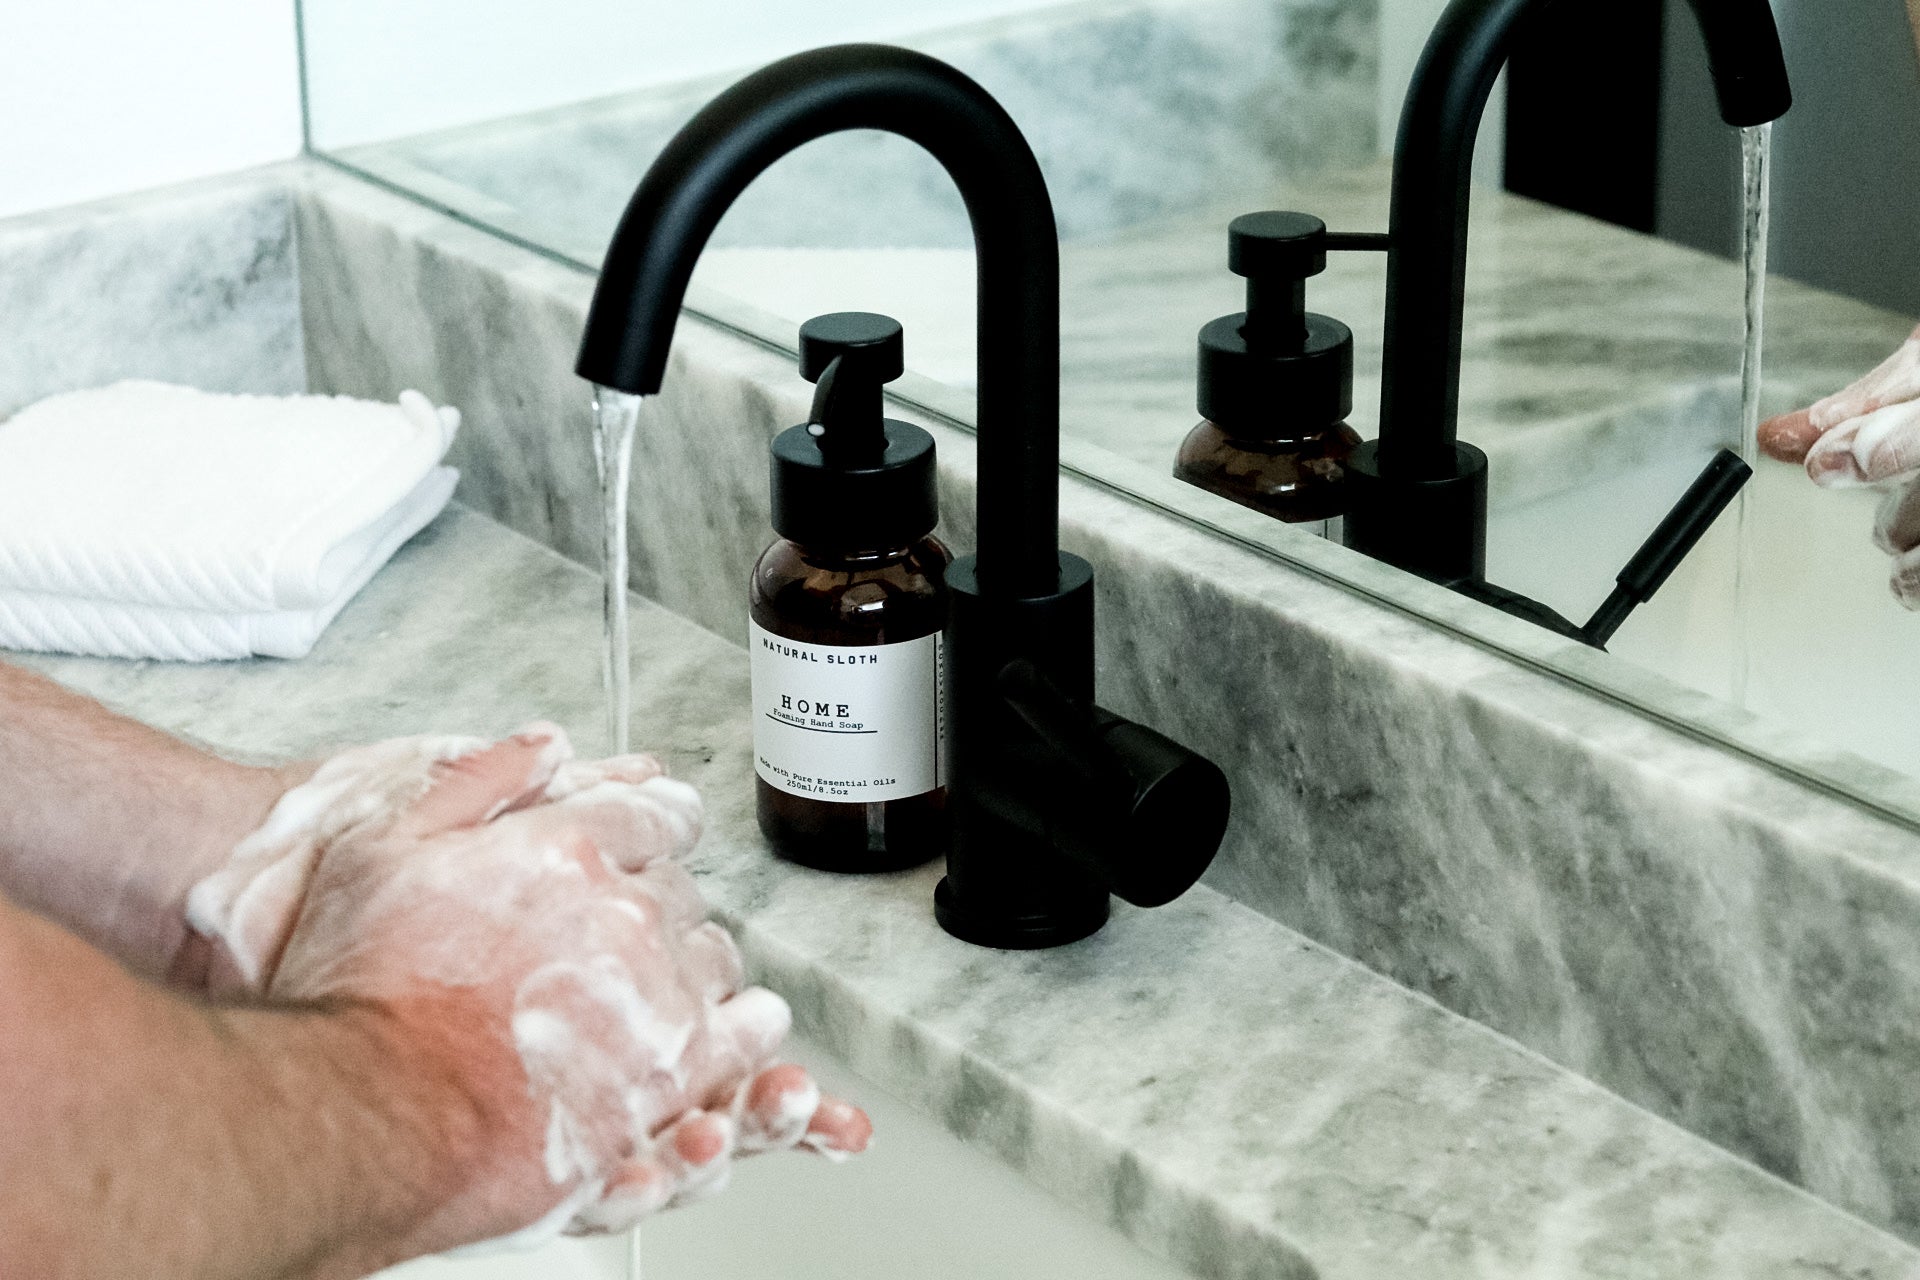 Home Foaming Hand Soap